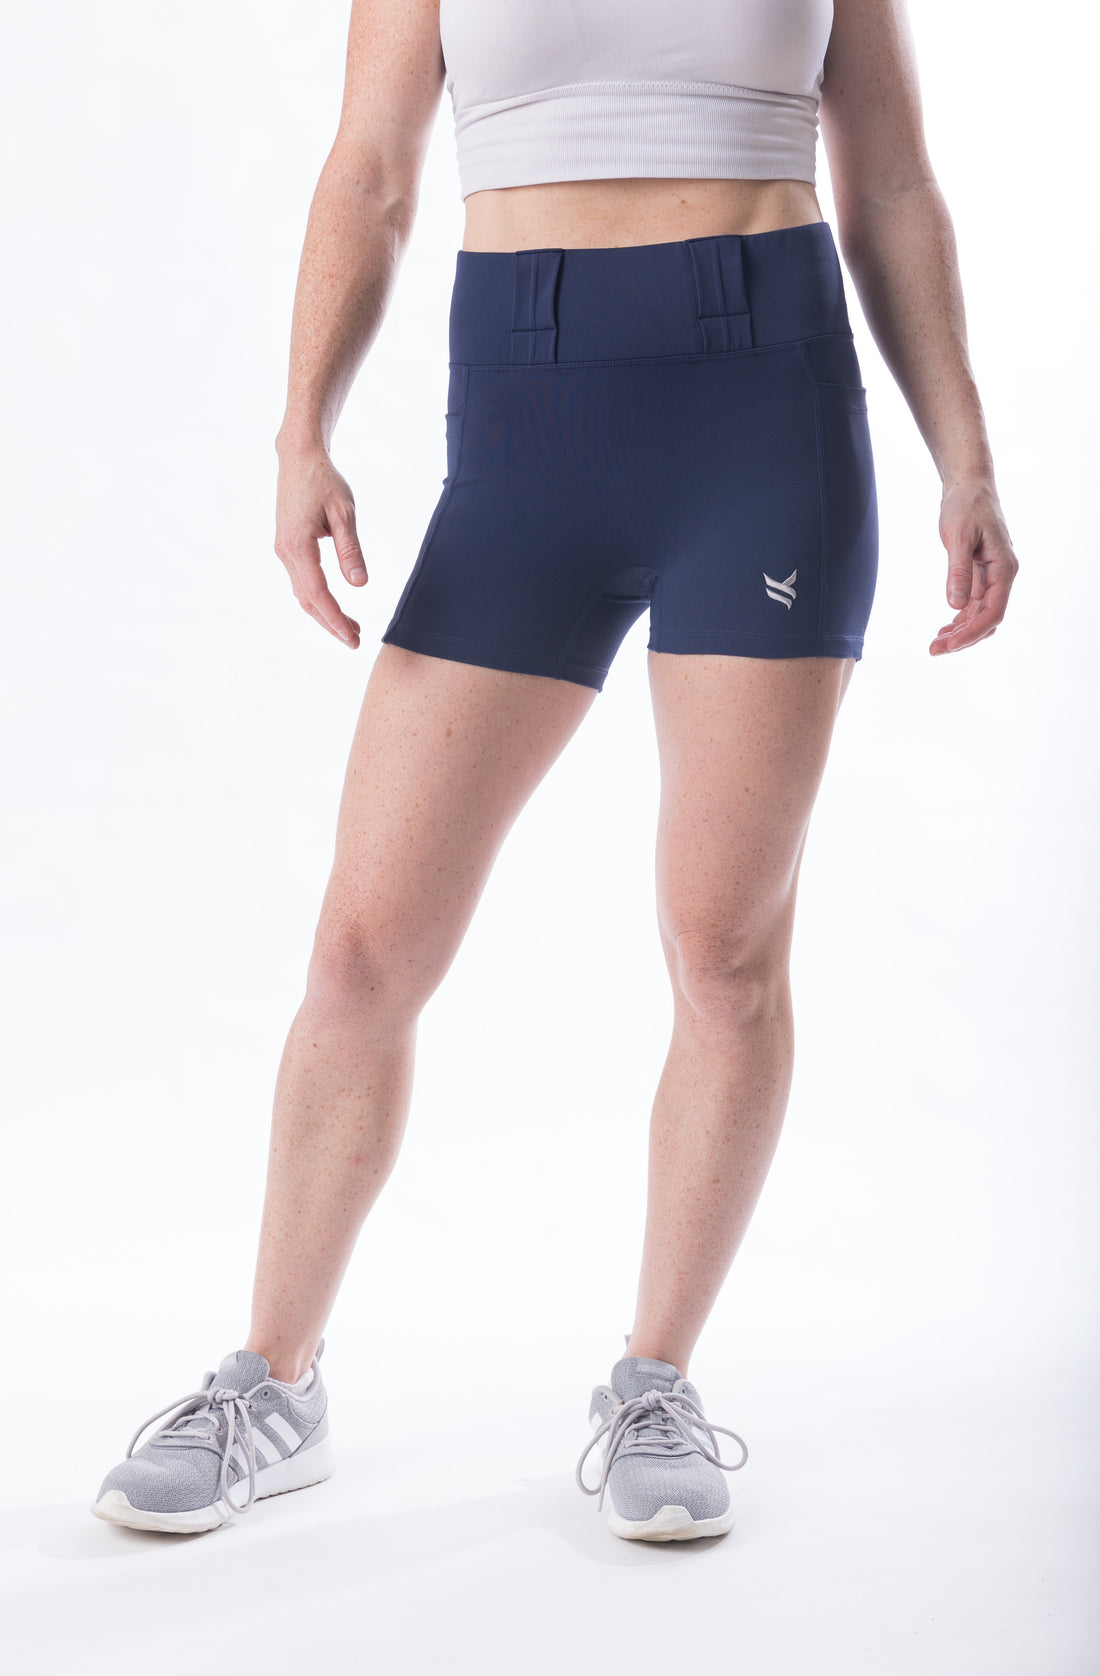 NEW Women's High Rise Curvy Carry Shorts, 3" inseam - Navy